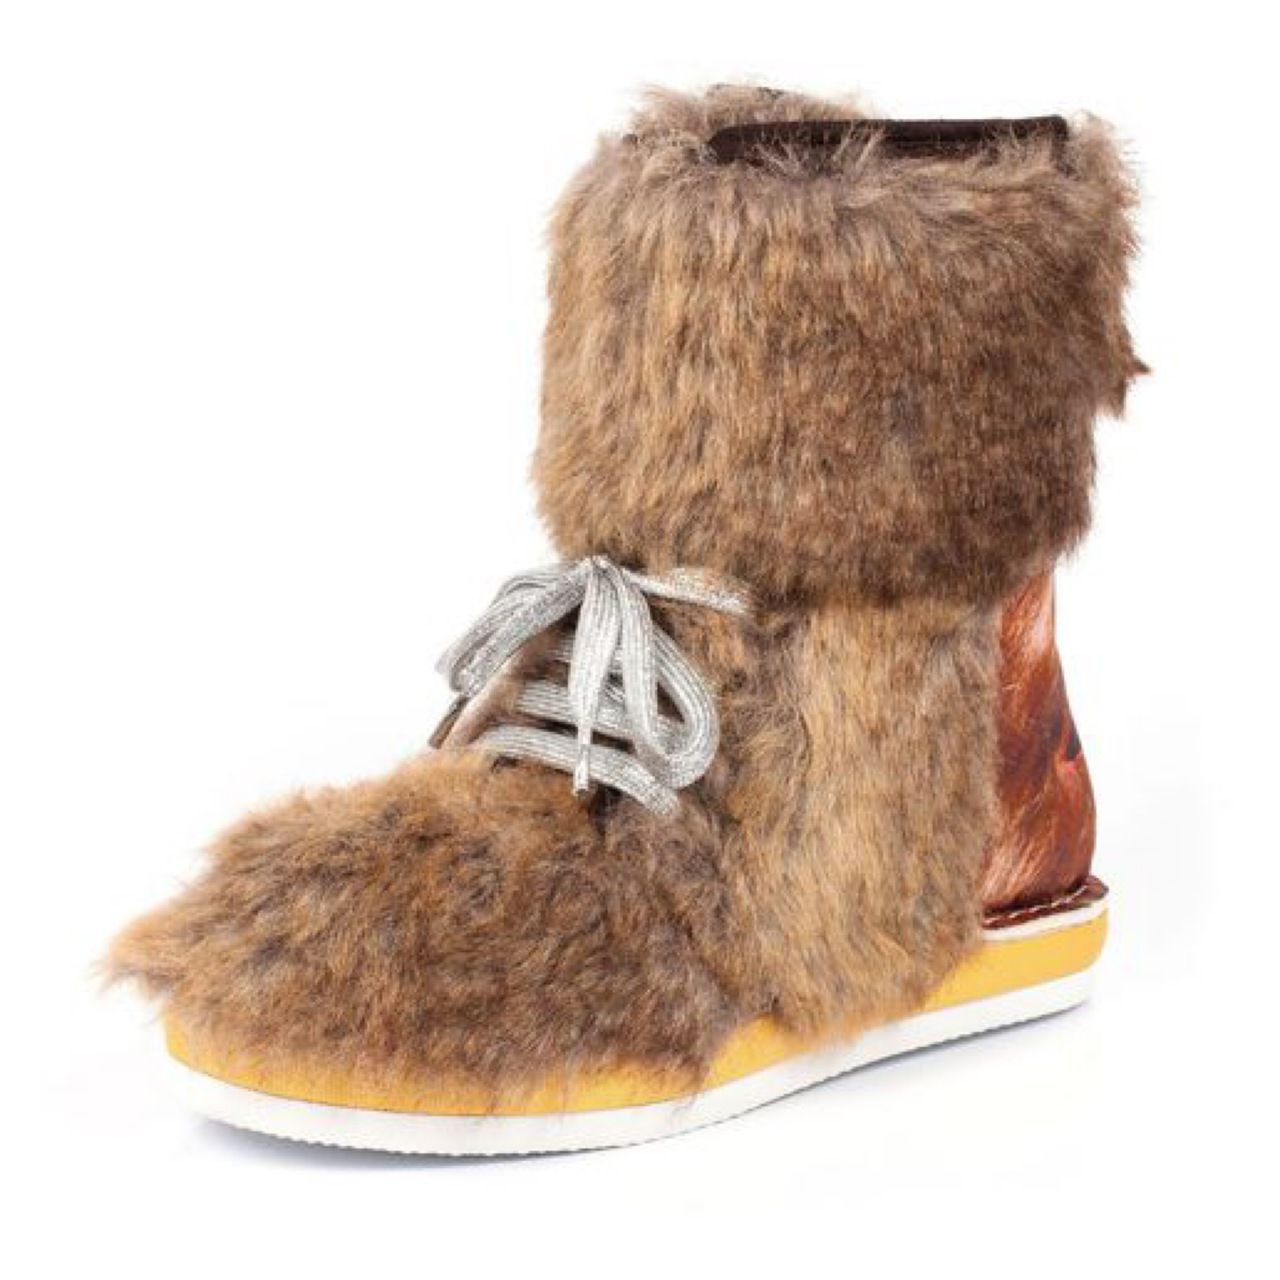 In these stylish Chewbacca boots, you'll never upset a Wookiee